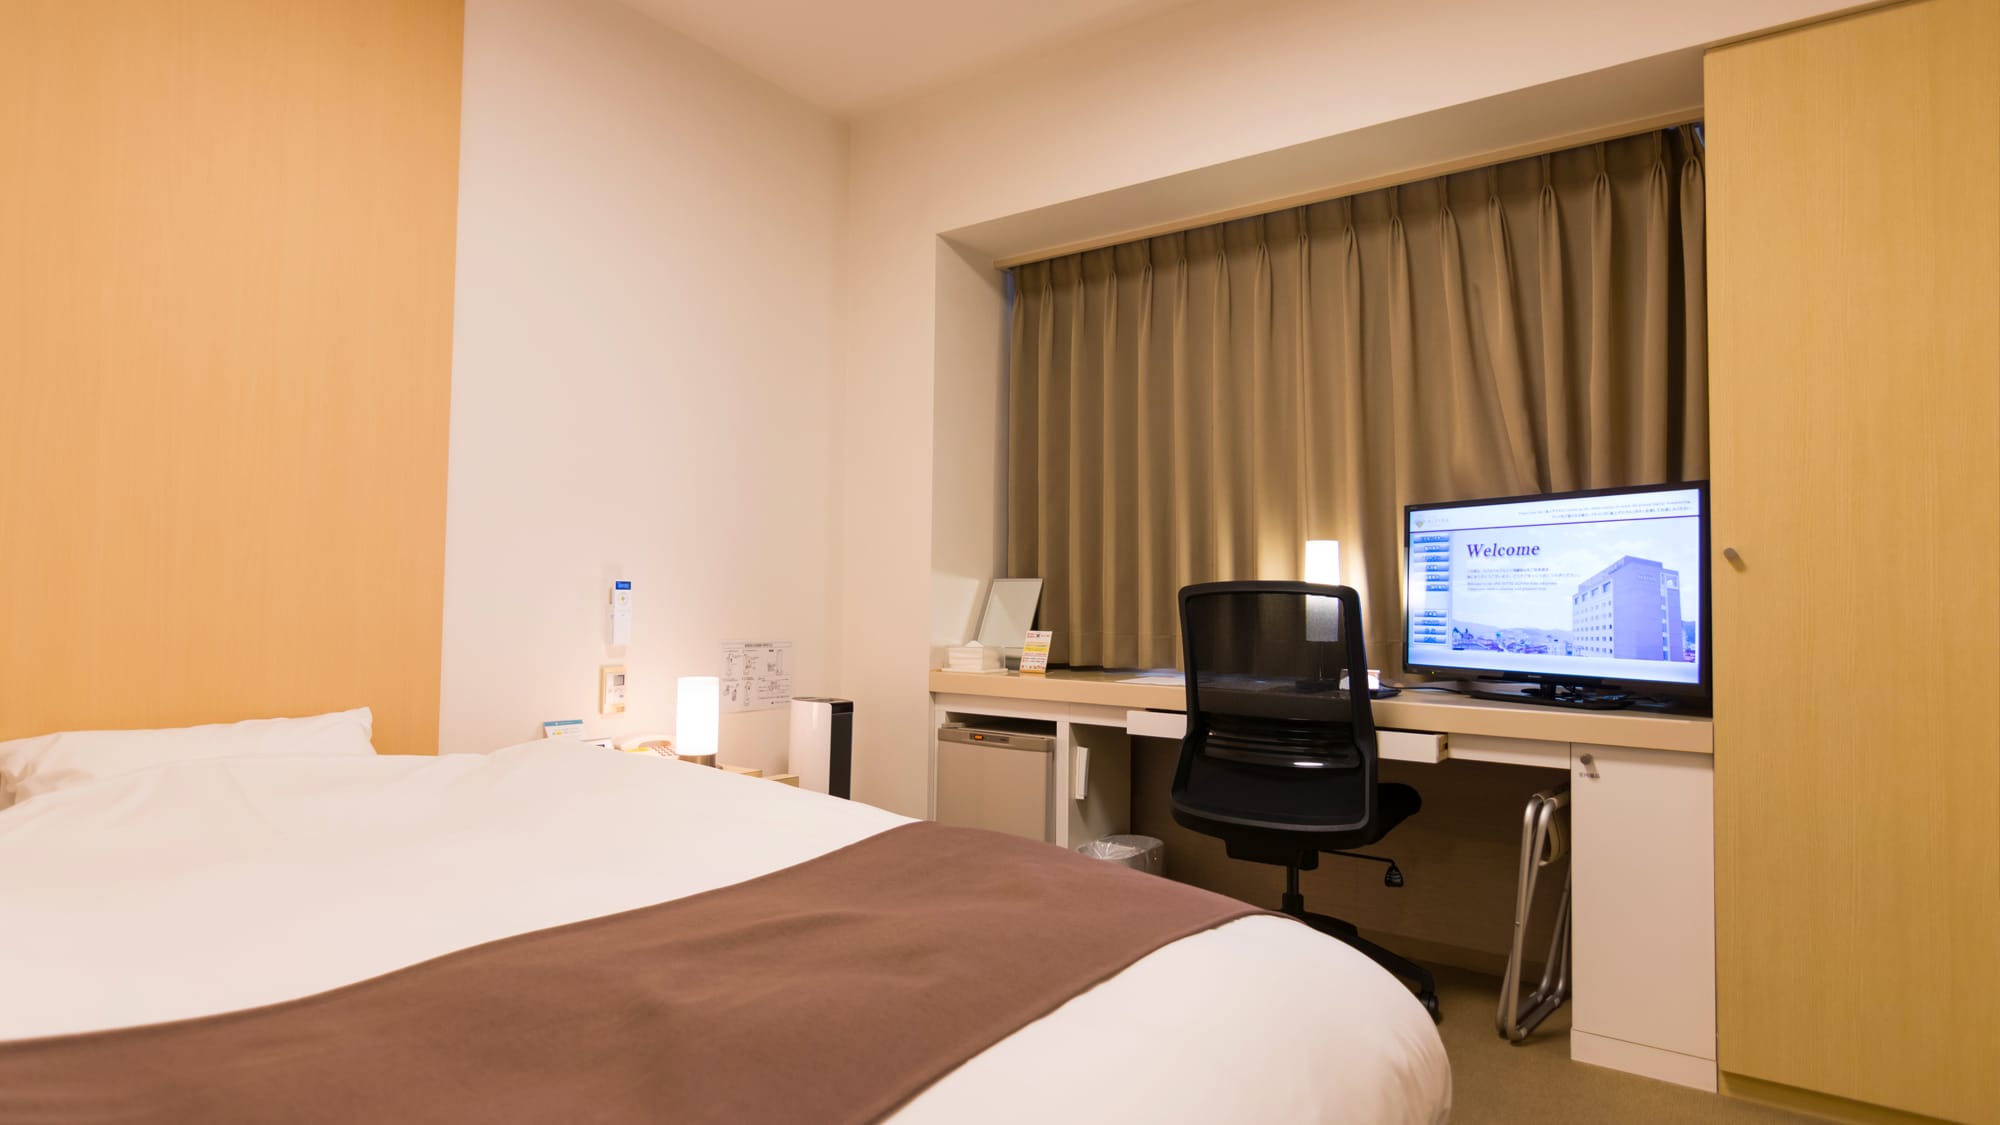 Single room with 140 cm bed and spacious desk. The necessary functions are summarized in a simple and compact manner.